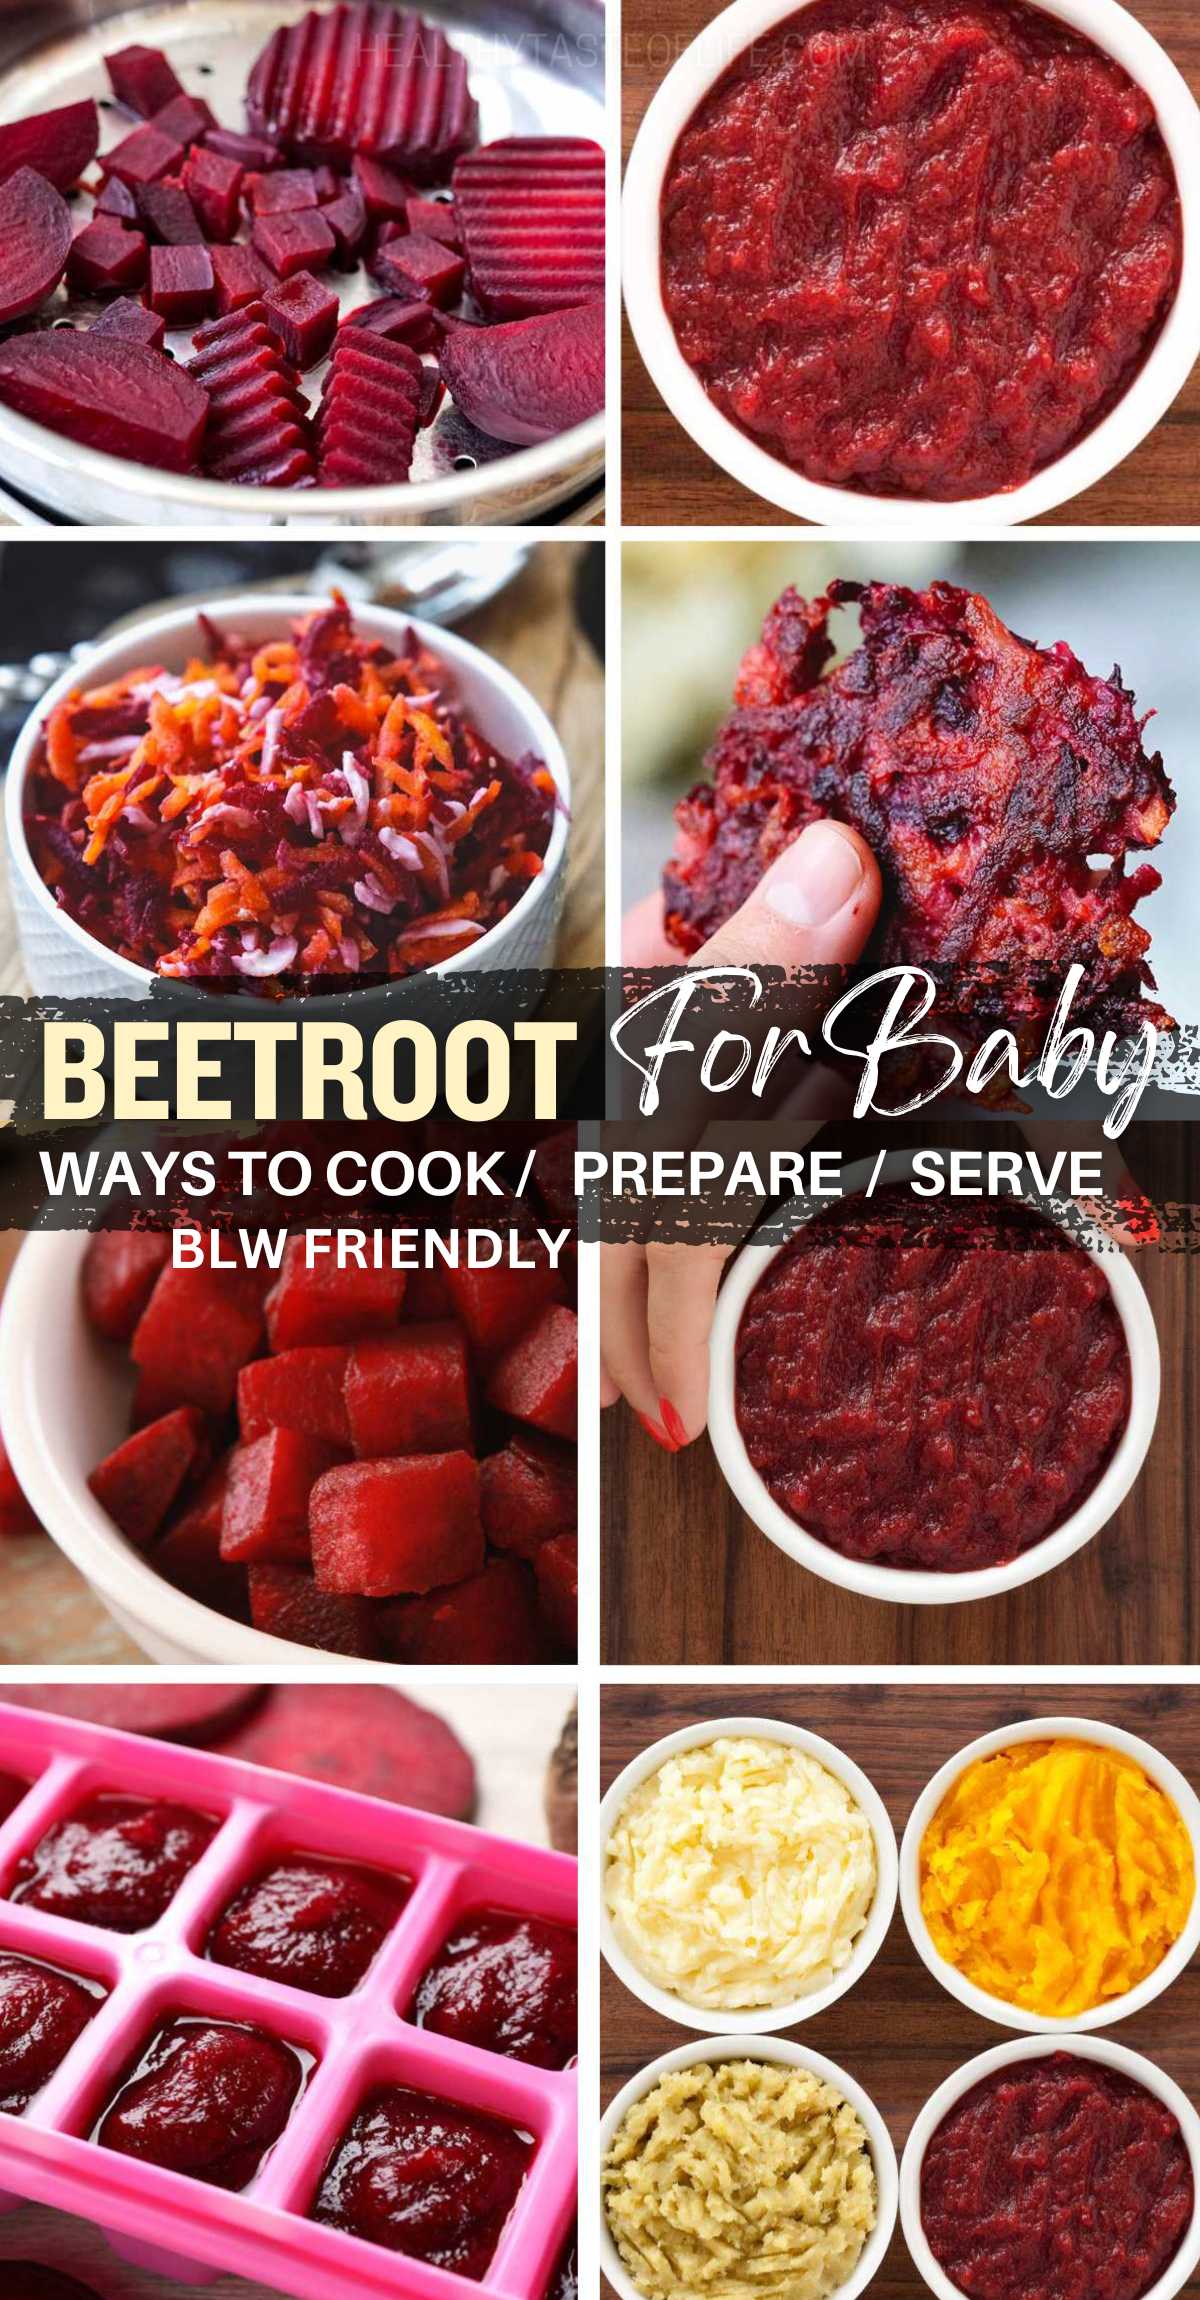 Beetroot for babies - their benefits for your baby's diet and ways to prepare them. From purees to finger foods (BLW), discover nutritious ways to cook and serve beetroot for your baby. From beetroot mash to beetroot pancakes, explore a variety of easy and healthy recipes that will excite your baby's taste buds and set them on a path of healthy eating. #BabyFoodIdeas #BeetrootForBabies #HealthyRecipesForBabies #FirstFoods #BabyLedWeaning